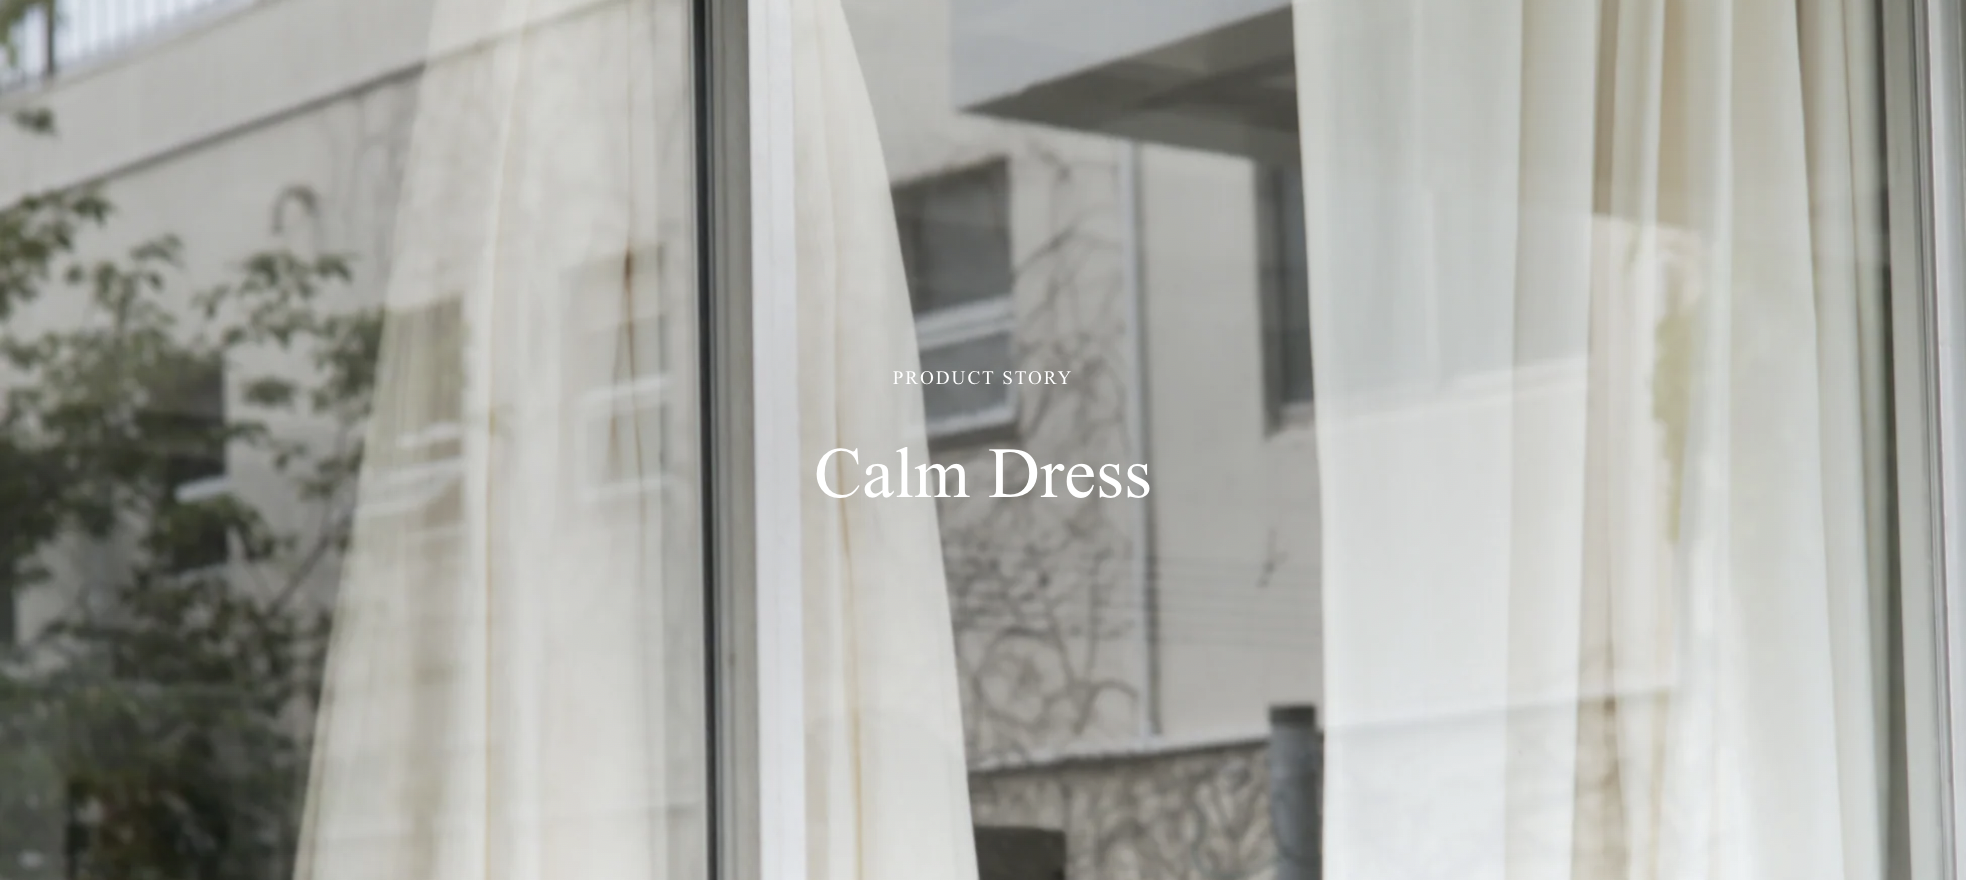 PRODUCT STORY / Calm Dress Ⅰ